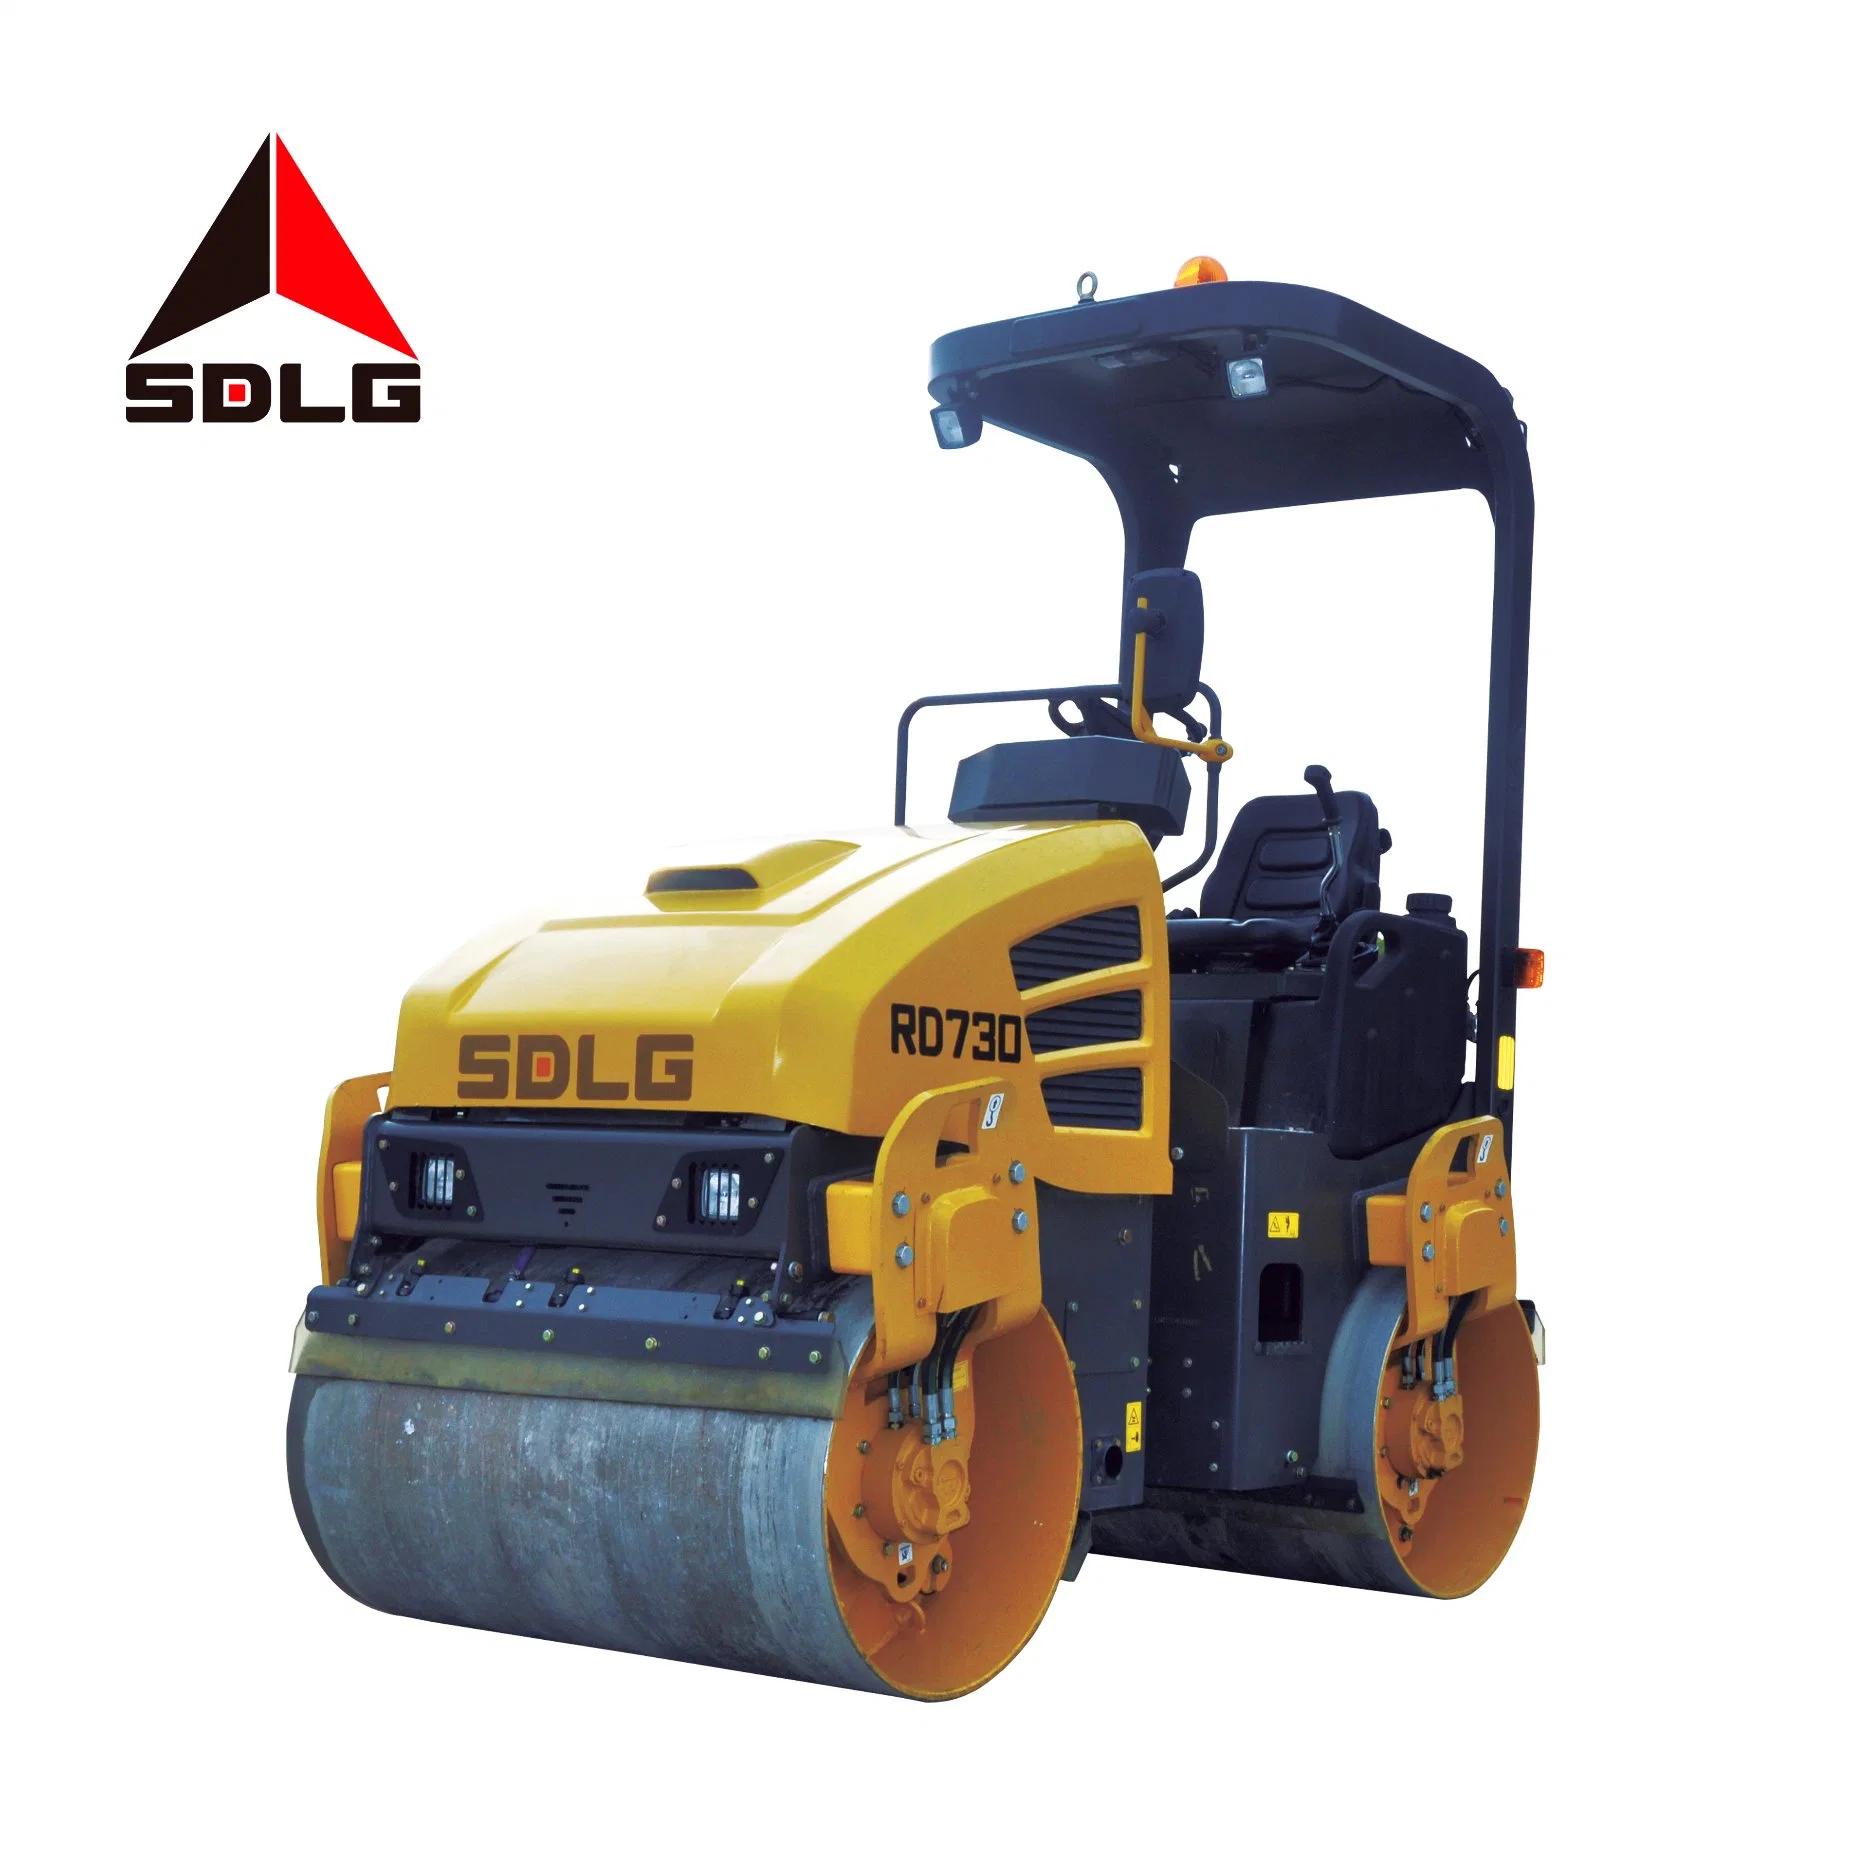 Sdlg Rd730 Full Hydraulic Double Steel Wheel Vibratory Roller with Multifunctional Articulation